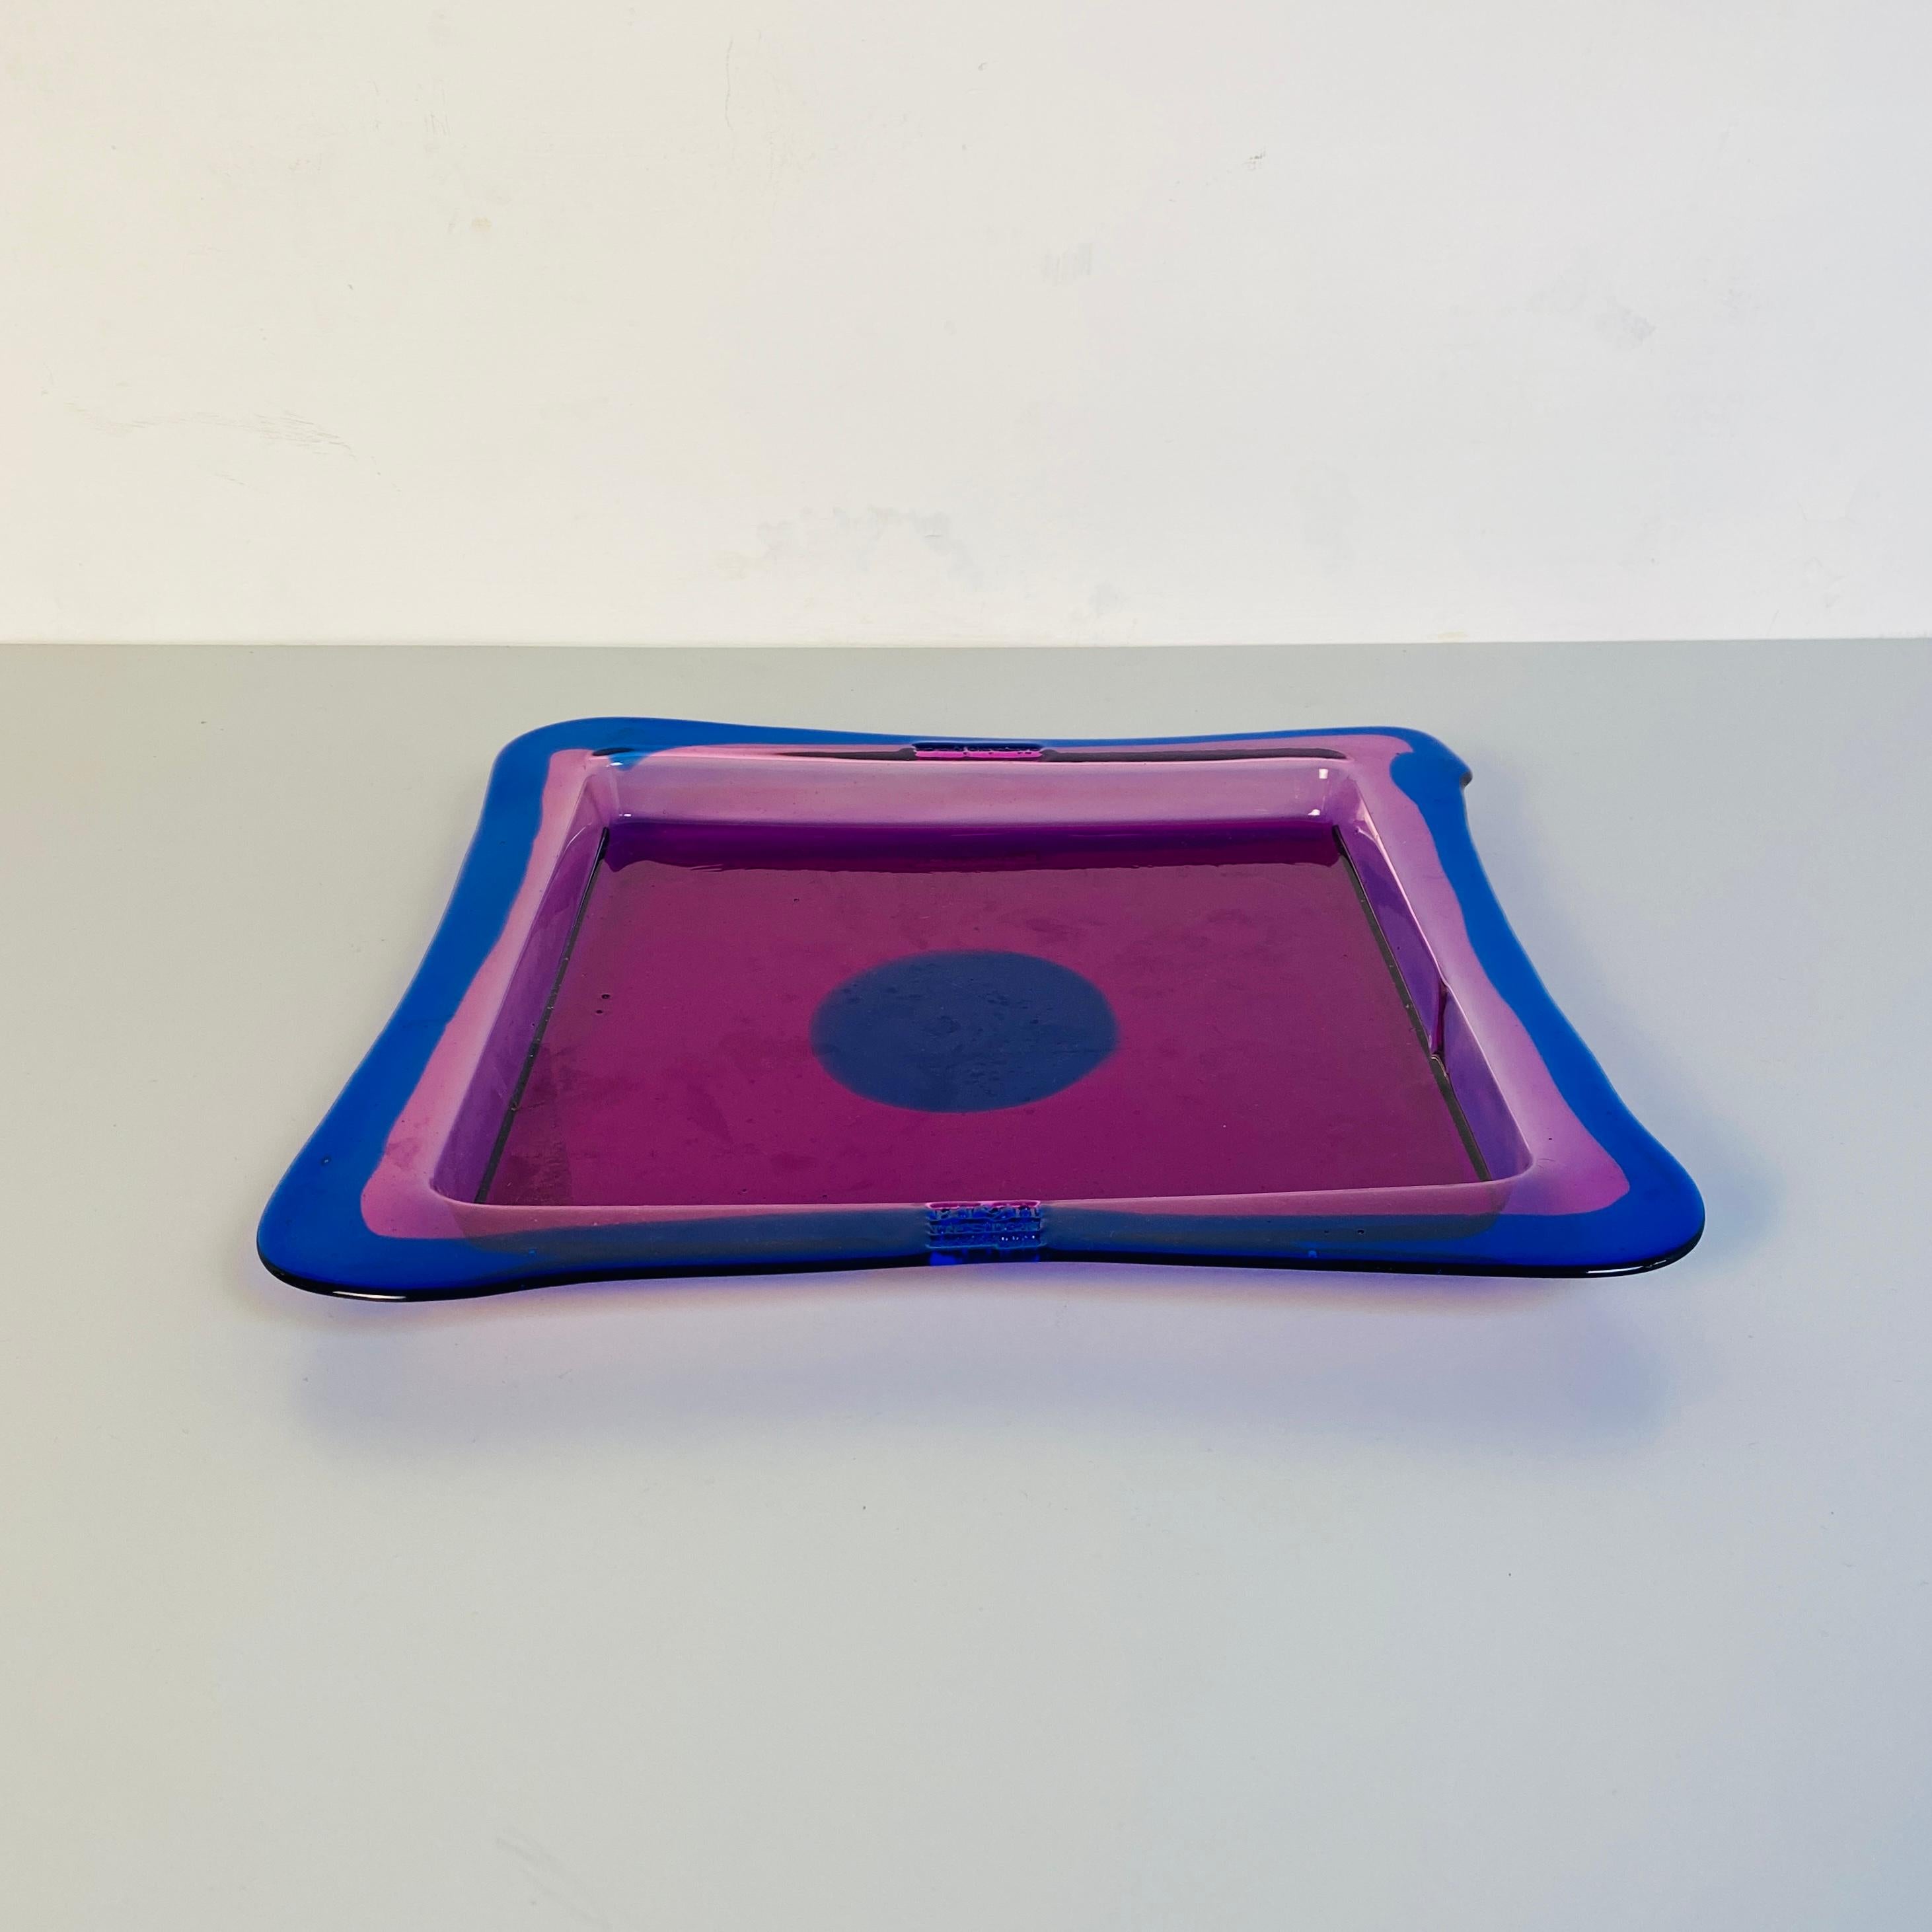 Italian Resin tray mod. Try Tray Square in blue and fuchsia by Gaetano Pesce for Fish Design, 2018
Resin tray Try Tray Square in transparent fuchsia and Blue, designed by Gaetano Pesce in 1998, produced by Fish Design in 2018.

Very good